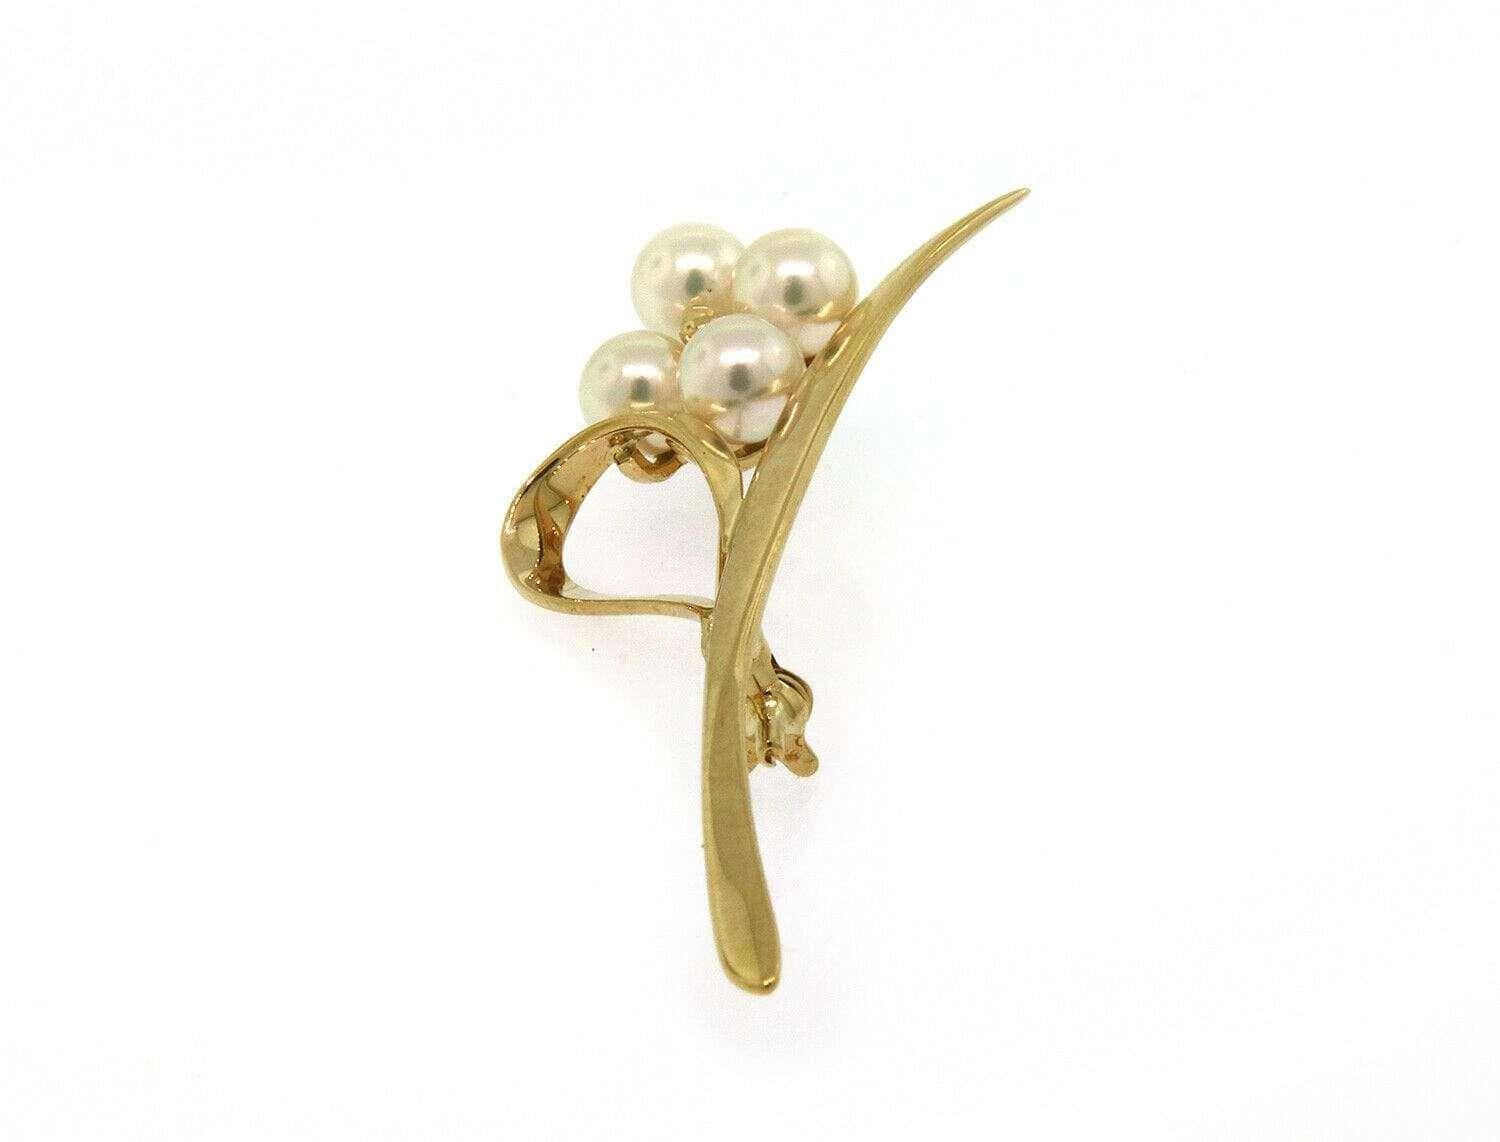 Mikimoto Akoya Pearl Flower Brooch in 18K

Mikimoto Pearl Brooch
18K Yellow Gold
Pearl Size: Approx. 6.5 MM
Brooch Length: Approx. 2 1/8” L
Weight: Approx. 6.5 Grams
Stamped: M, 750

Condition:
Offered for your consideration is a previously owned